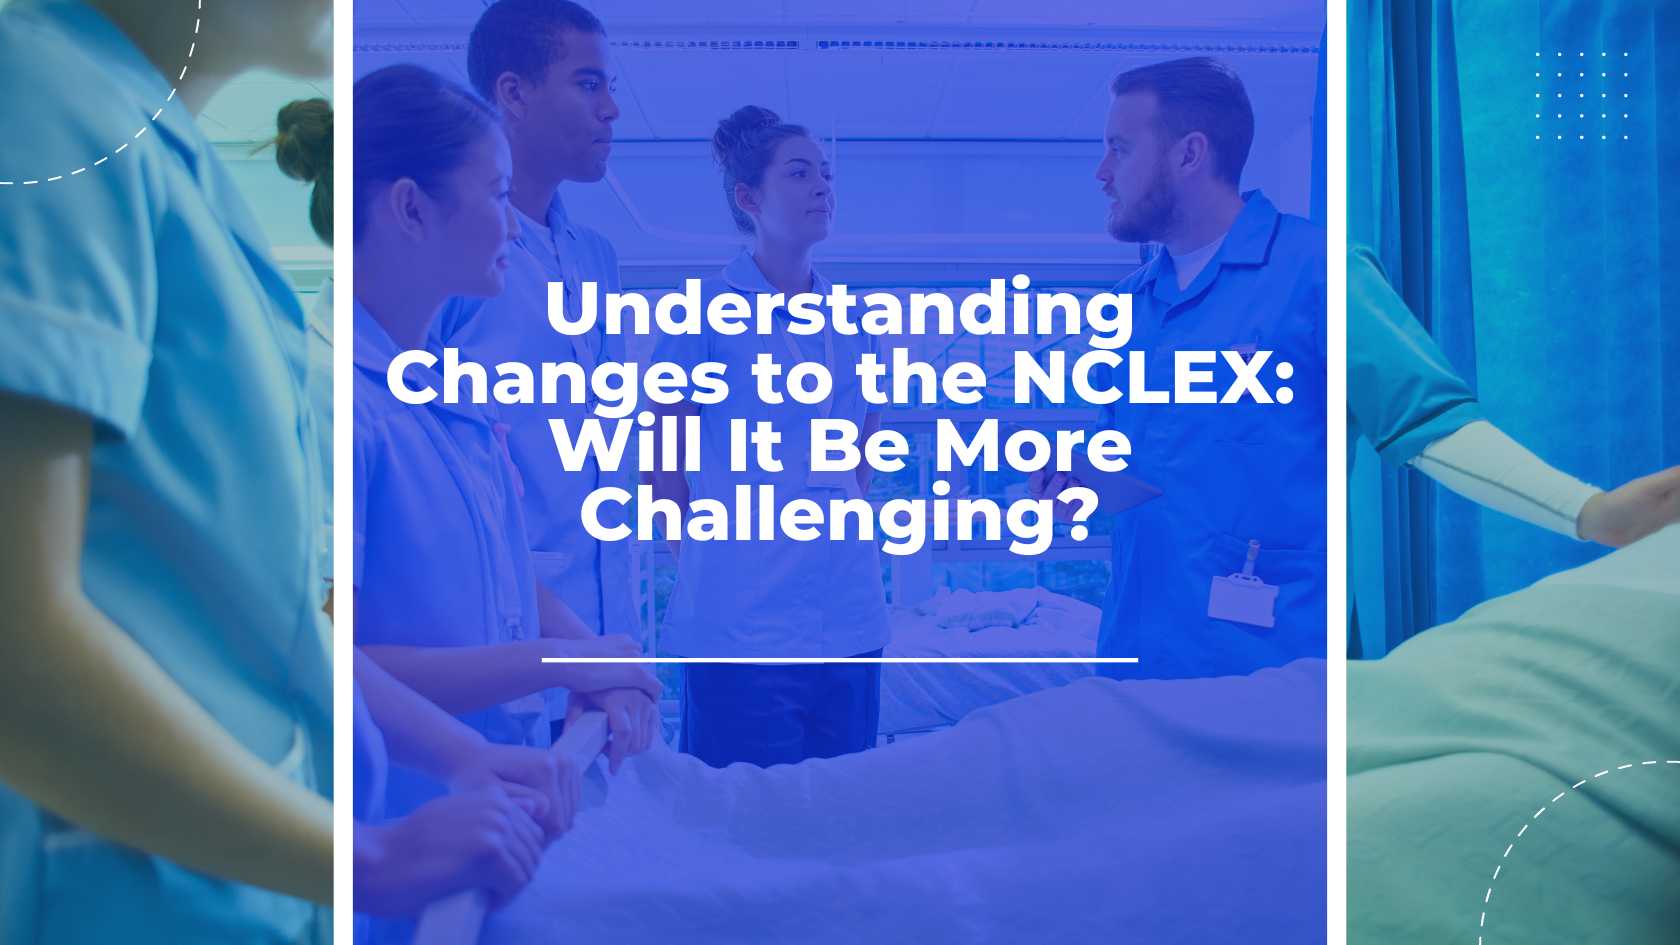 Understanding Changes to the NCLEX: Will It Be More Challenging?